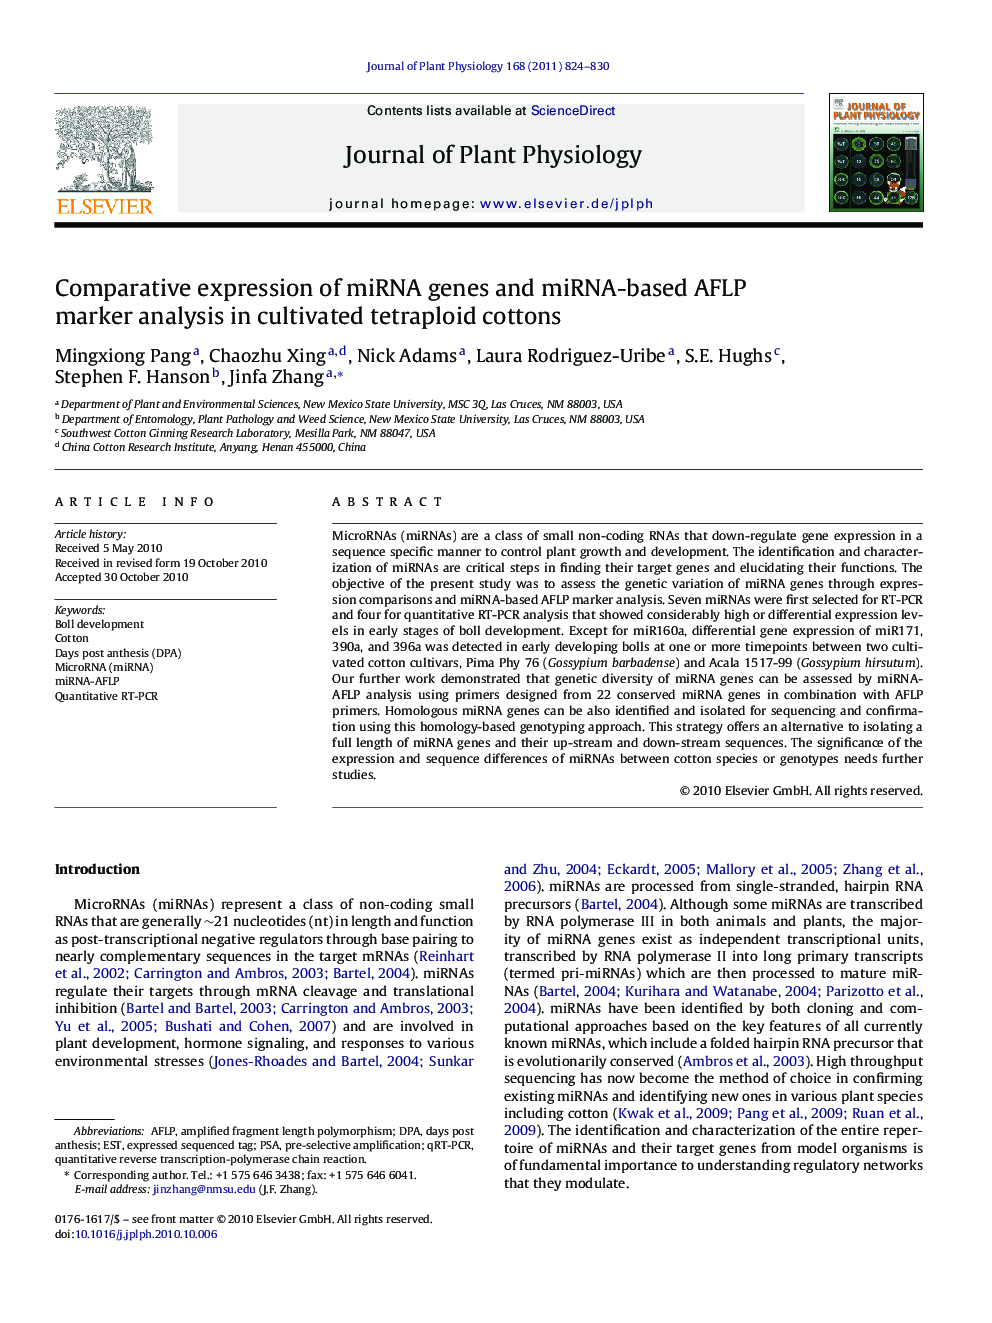 Comparative expression of miRNA genes and miRNA-based AFLP marker analysis in cultivated tetraploid cottons